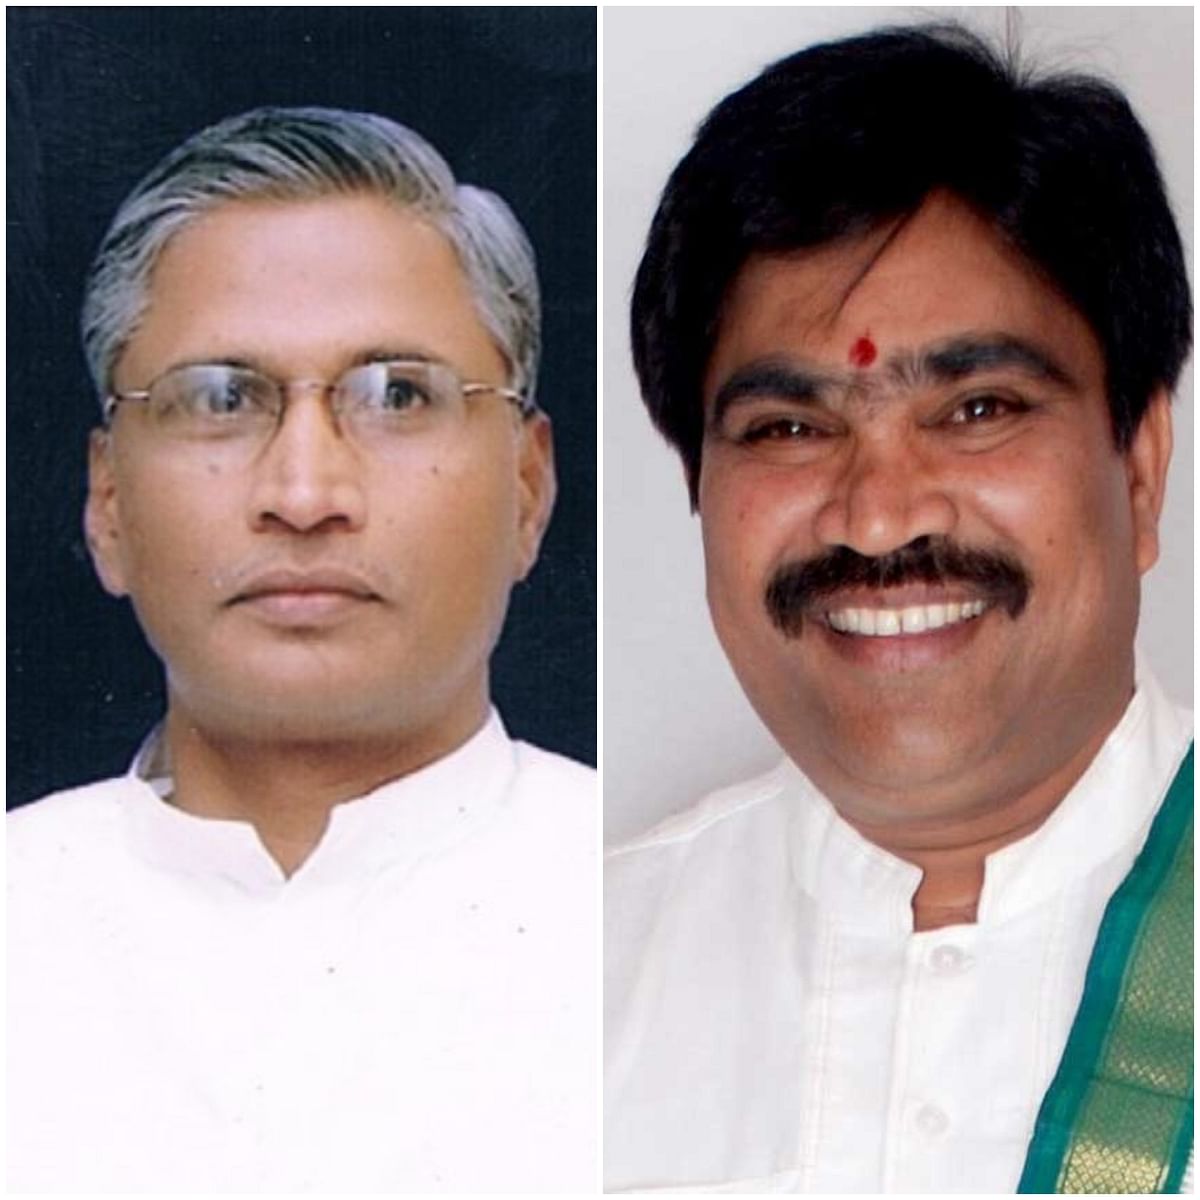 The curious case of two MLAs who hadn’t resigned